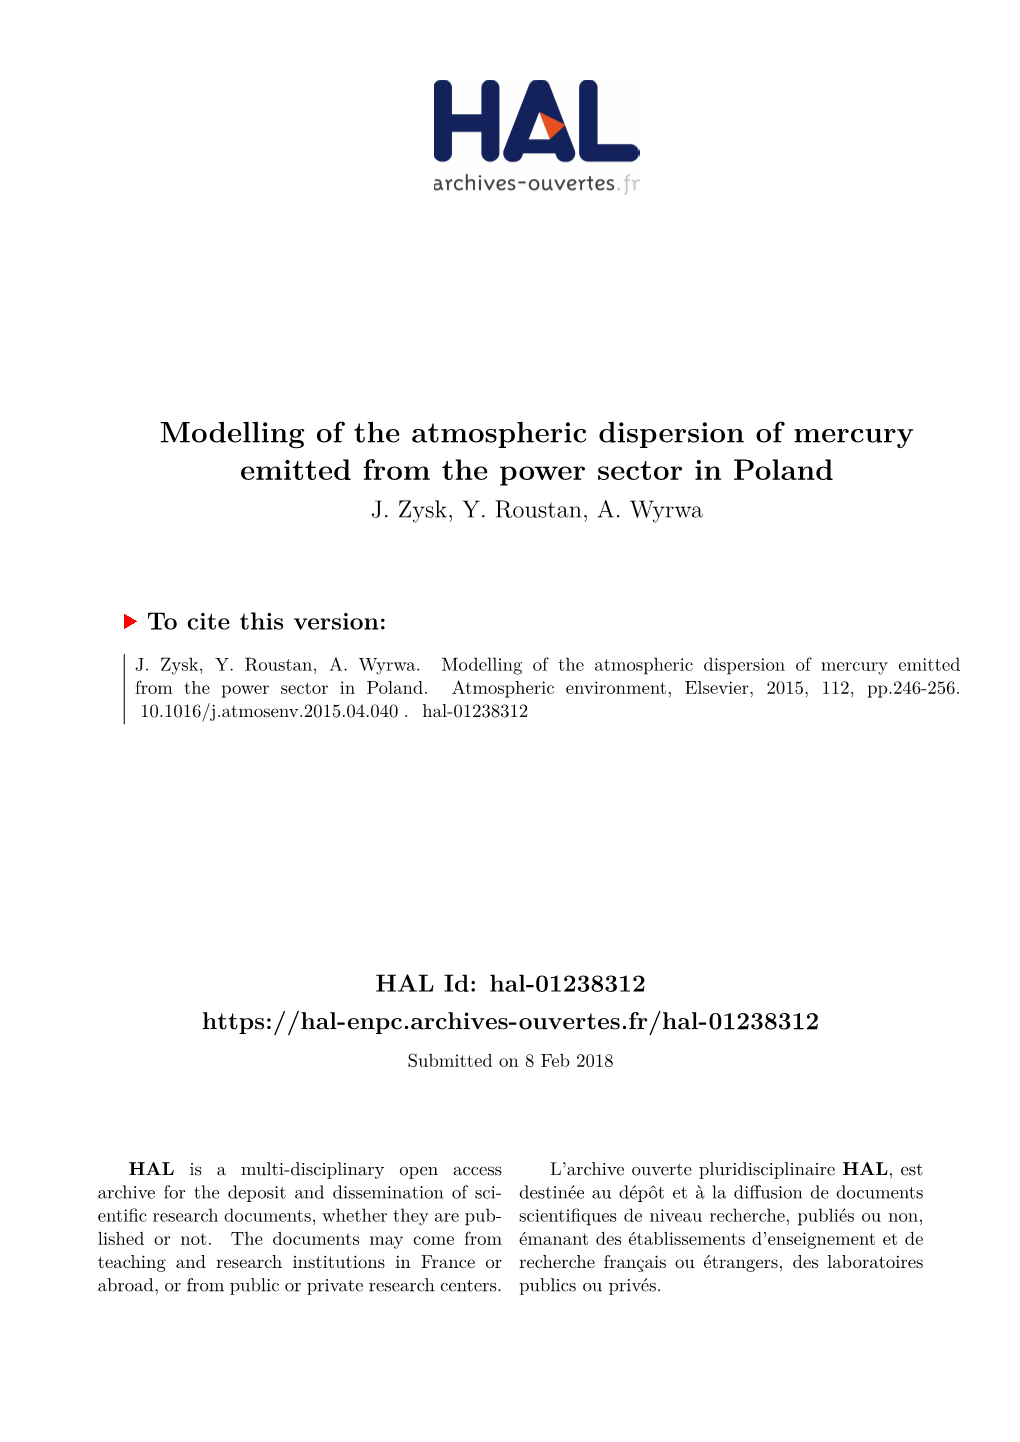 Modelling of the Atmospheric Dispersion of Mercury Emitted from the Power Sector in Poland J